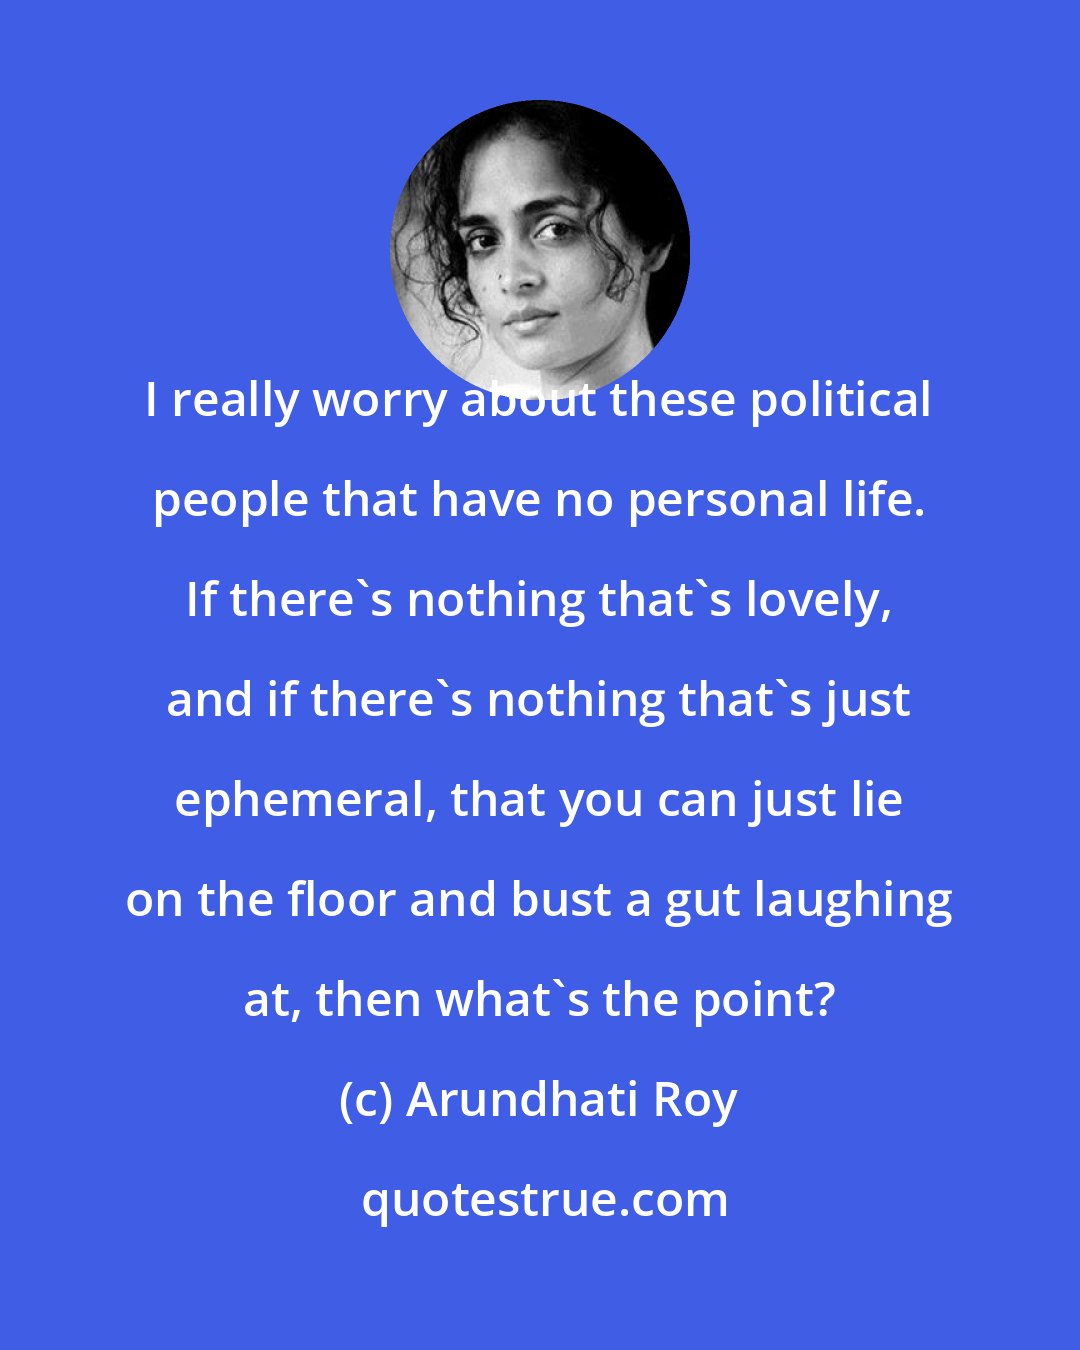 Arundhati Roy: I really worry about these political people that have no personal life. If there's nothing that's lovely, and if there's nothing that's just ephemeral, that you can just lie on the floor and bust a gut laughing at, then what's the point?